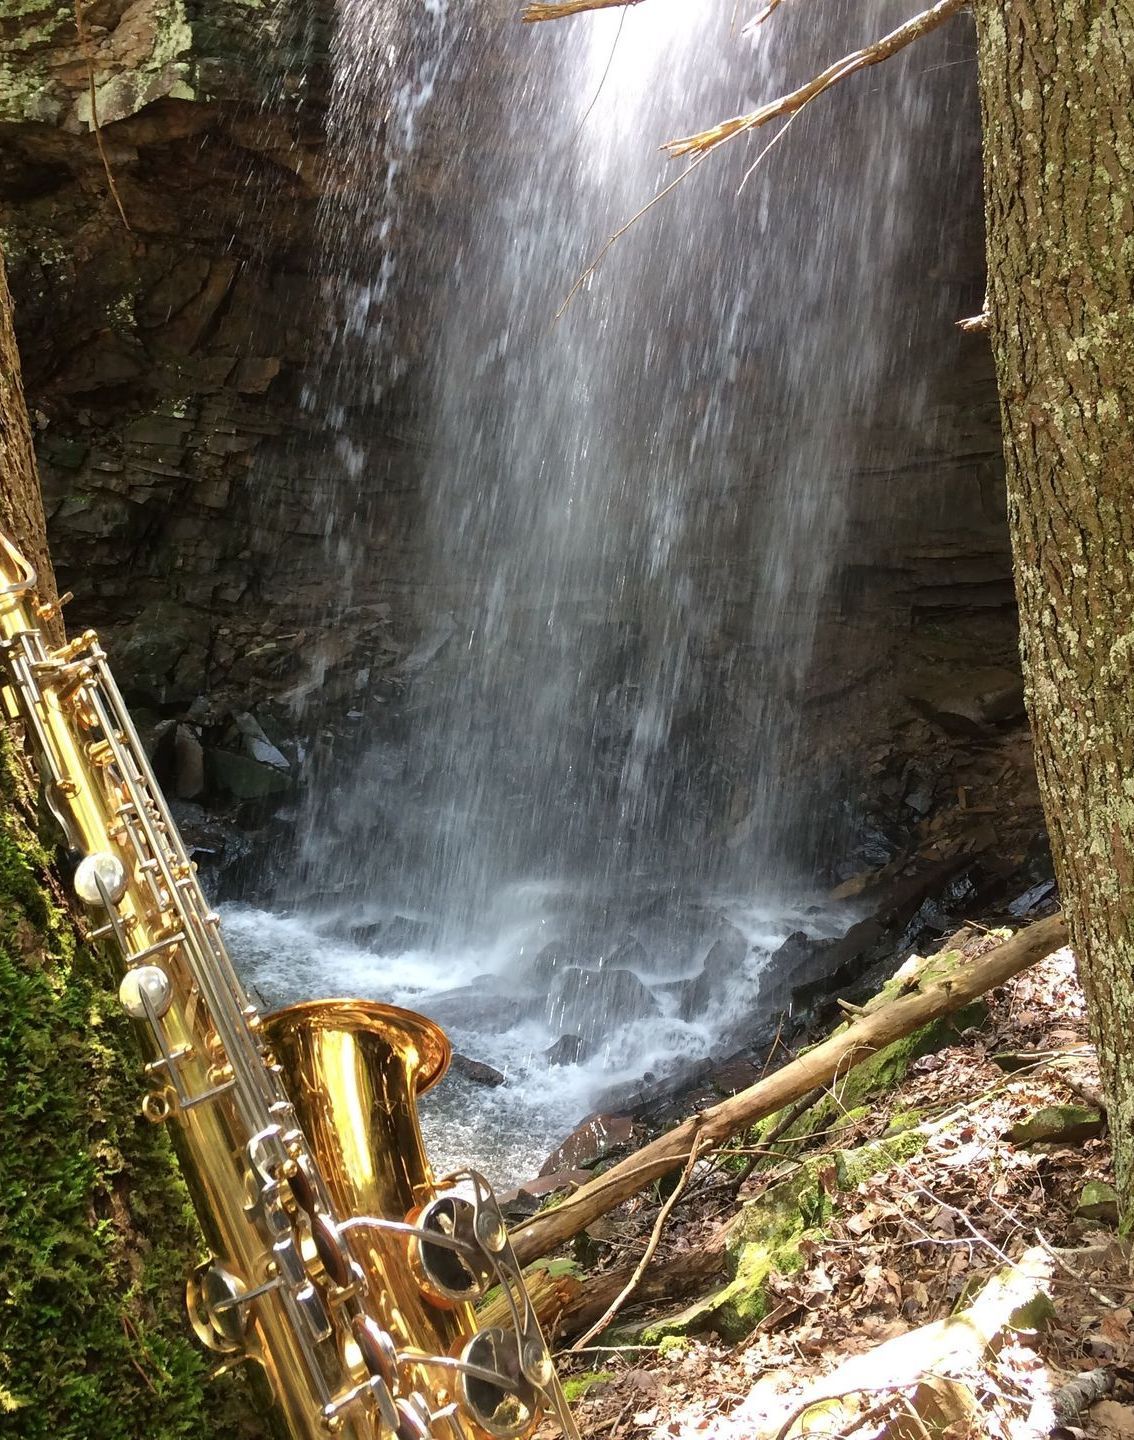 A saxophone is sitting in front of a waterfall in the woods.